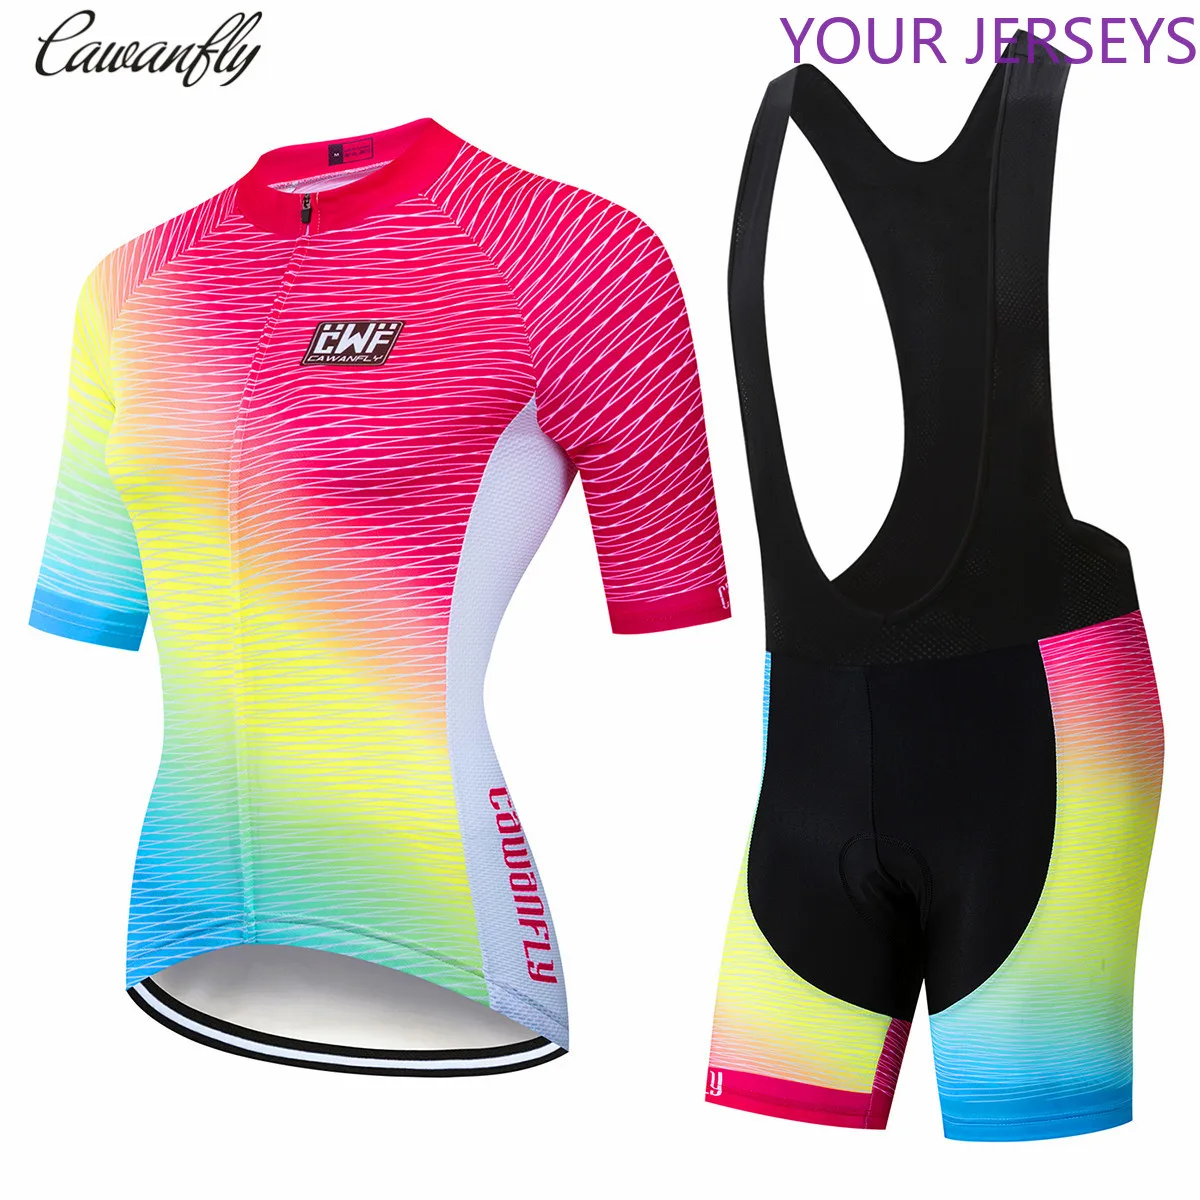 

Pro 2022 Woman Short Sleeve Cycling Jersey Set Sports Outfit Bike Clothing Kit Mtb Maillot Cyclist Bicycle Clothes Uniforme Wear